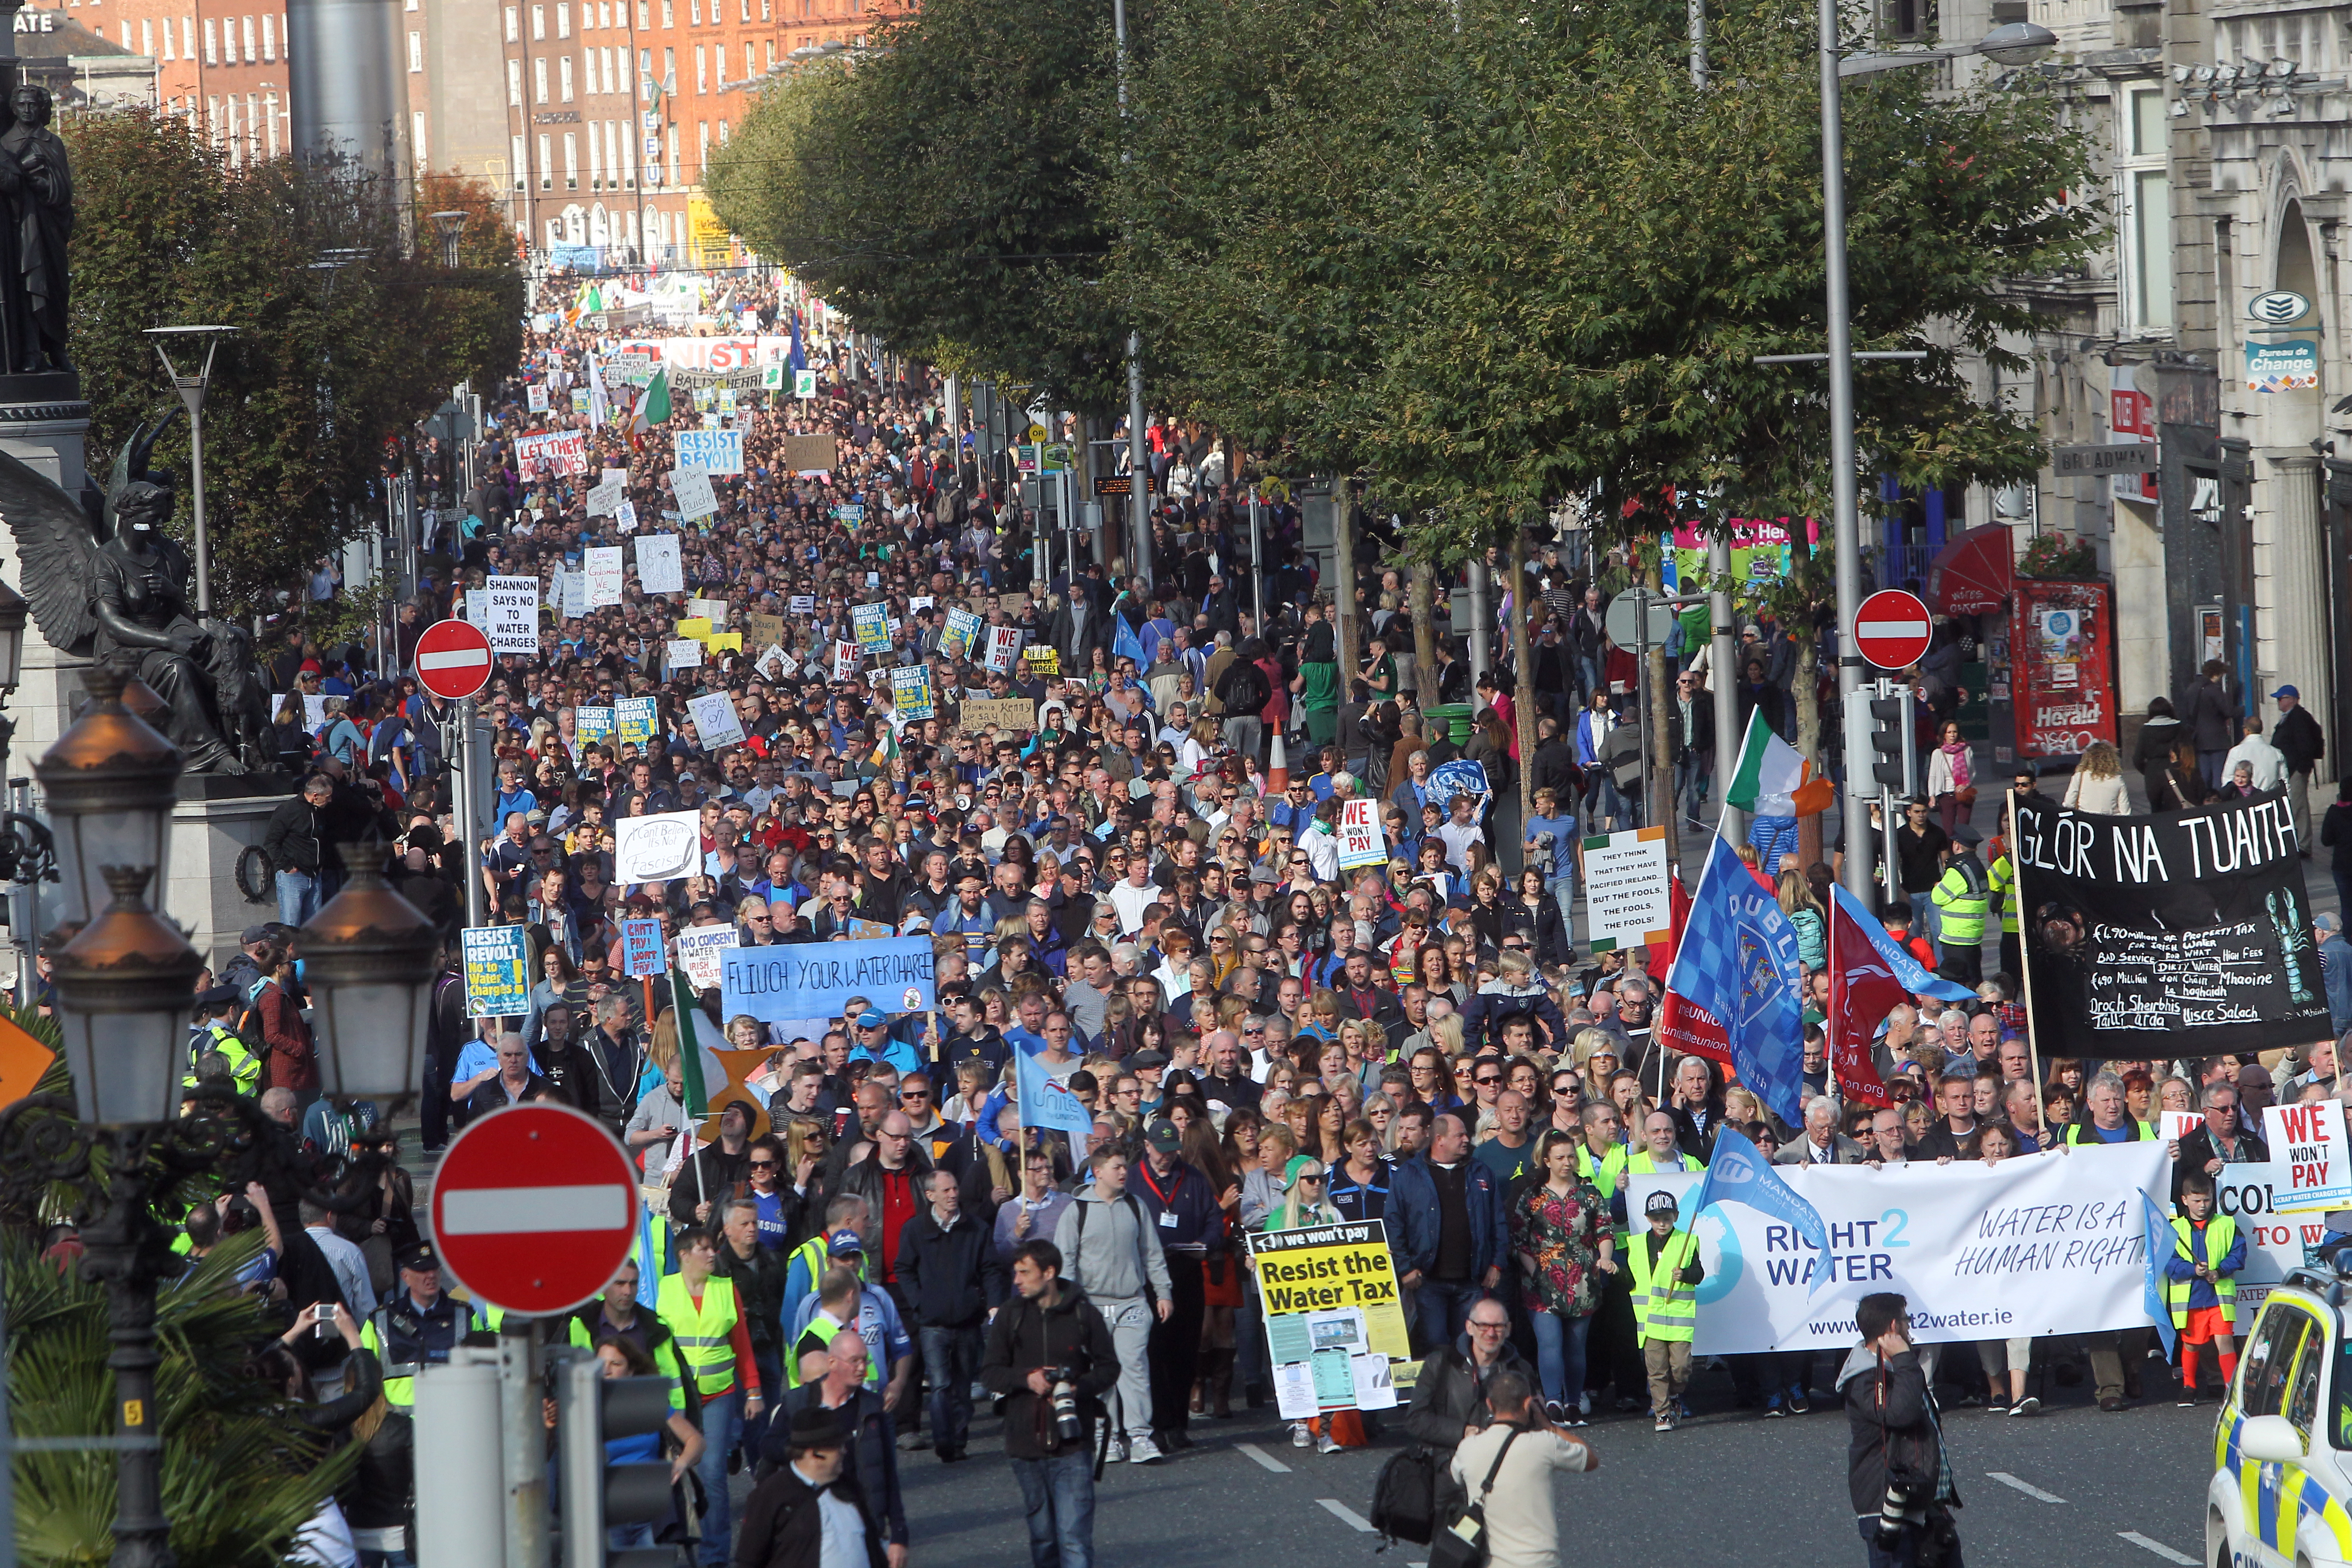 National water protest against water charges